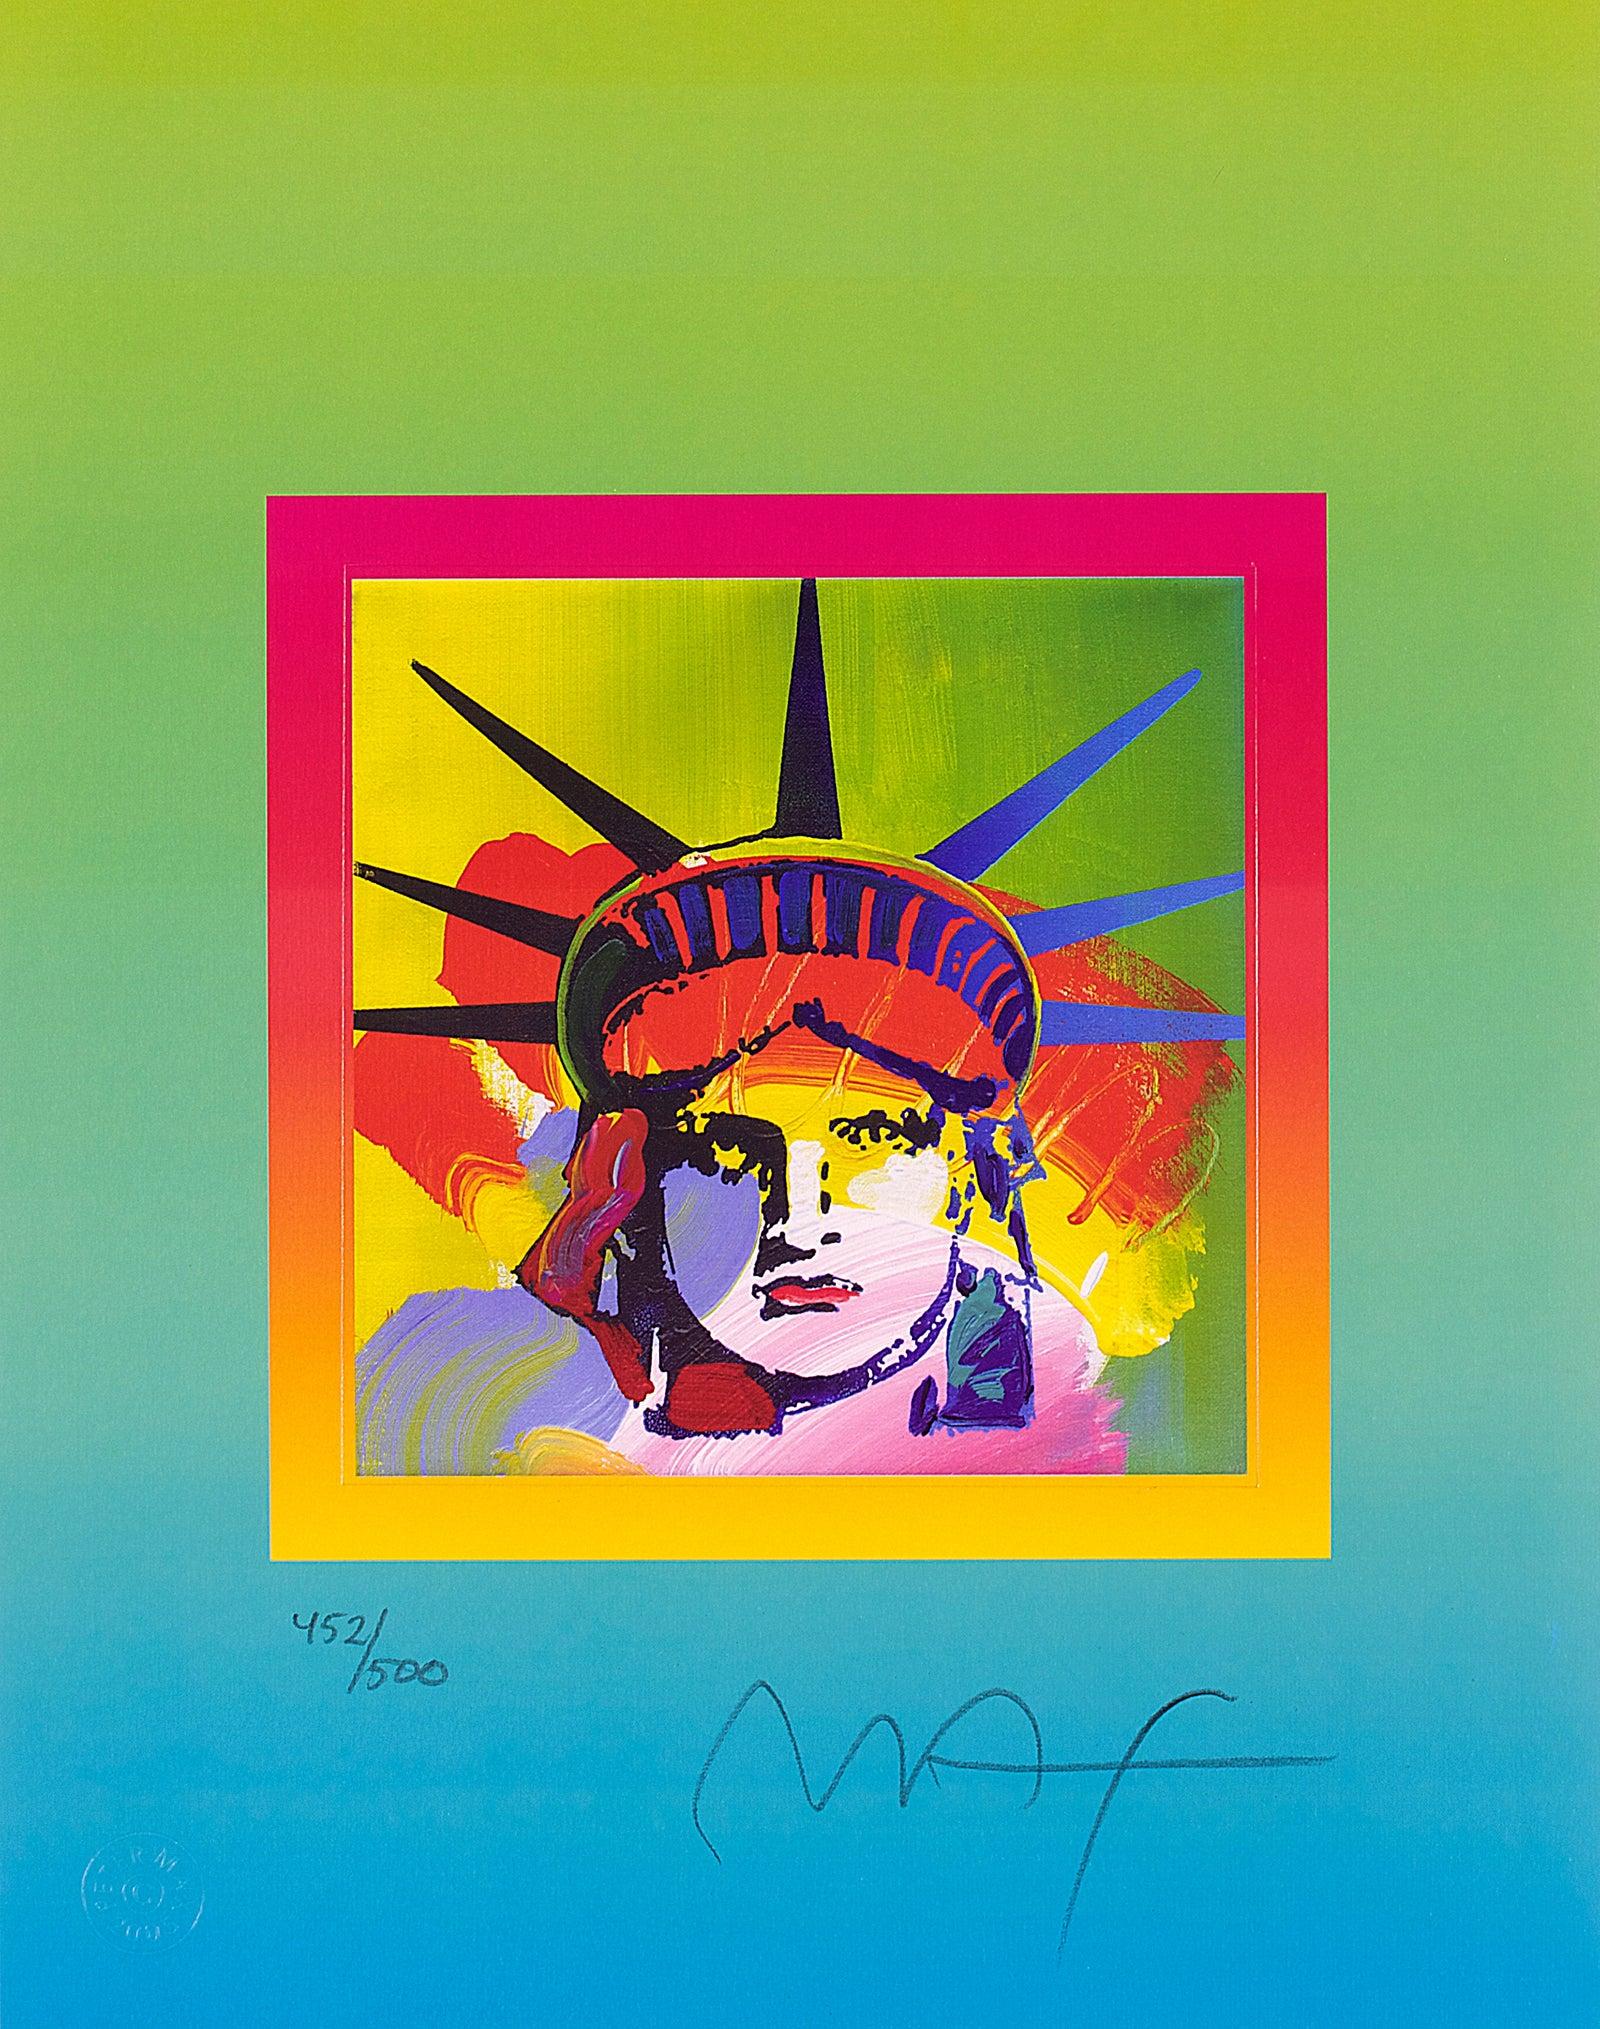 Artist: Peter Max (1937)
Title: Liberty Head on Blends
Year: 2005
Edition: 452/500, plus proofs
Medium: Lithograph on Lustro Saxony paper
Size: 12.75 x 10 inches
Condition: Excellent
Inscription: Signed and numbered by the artist.
Notes: Published